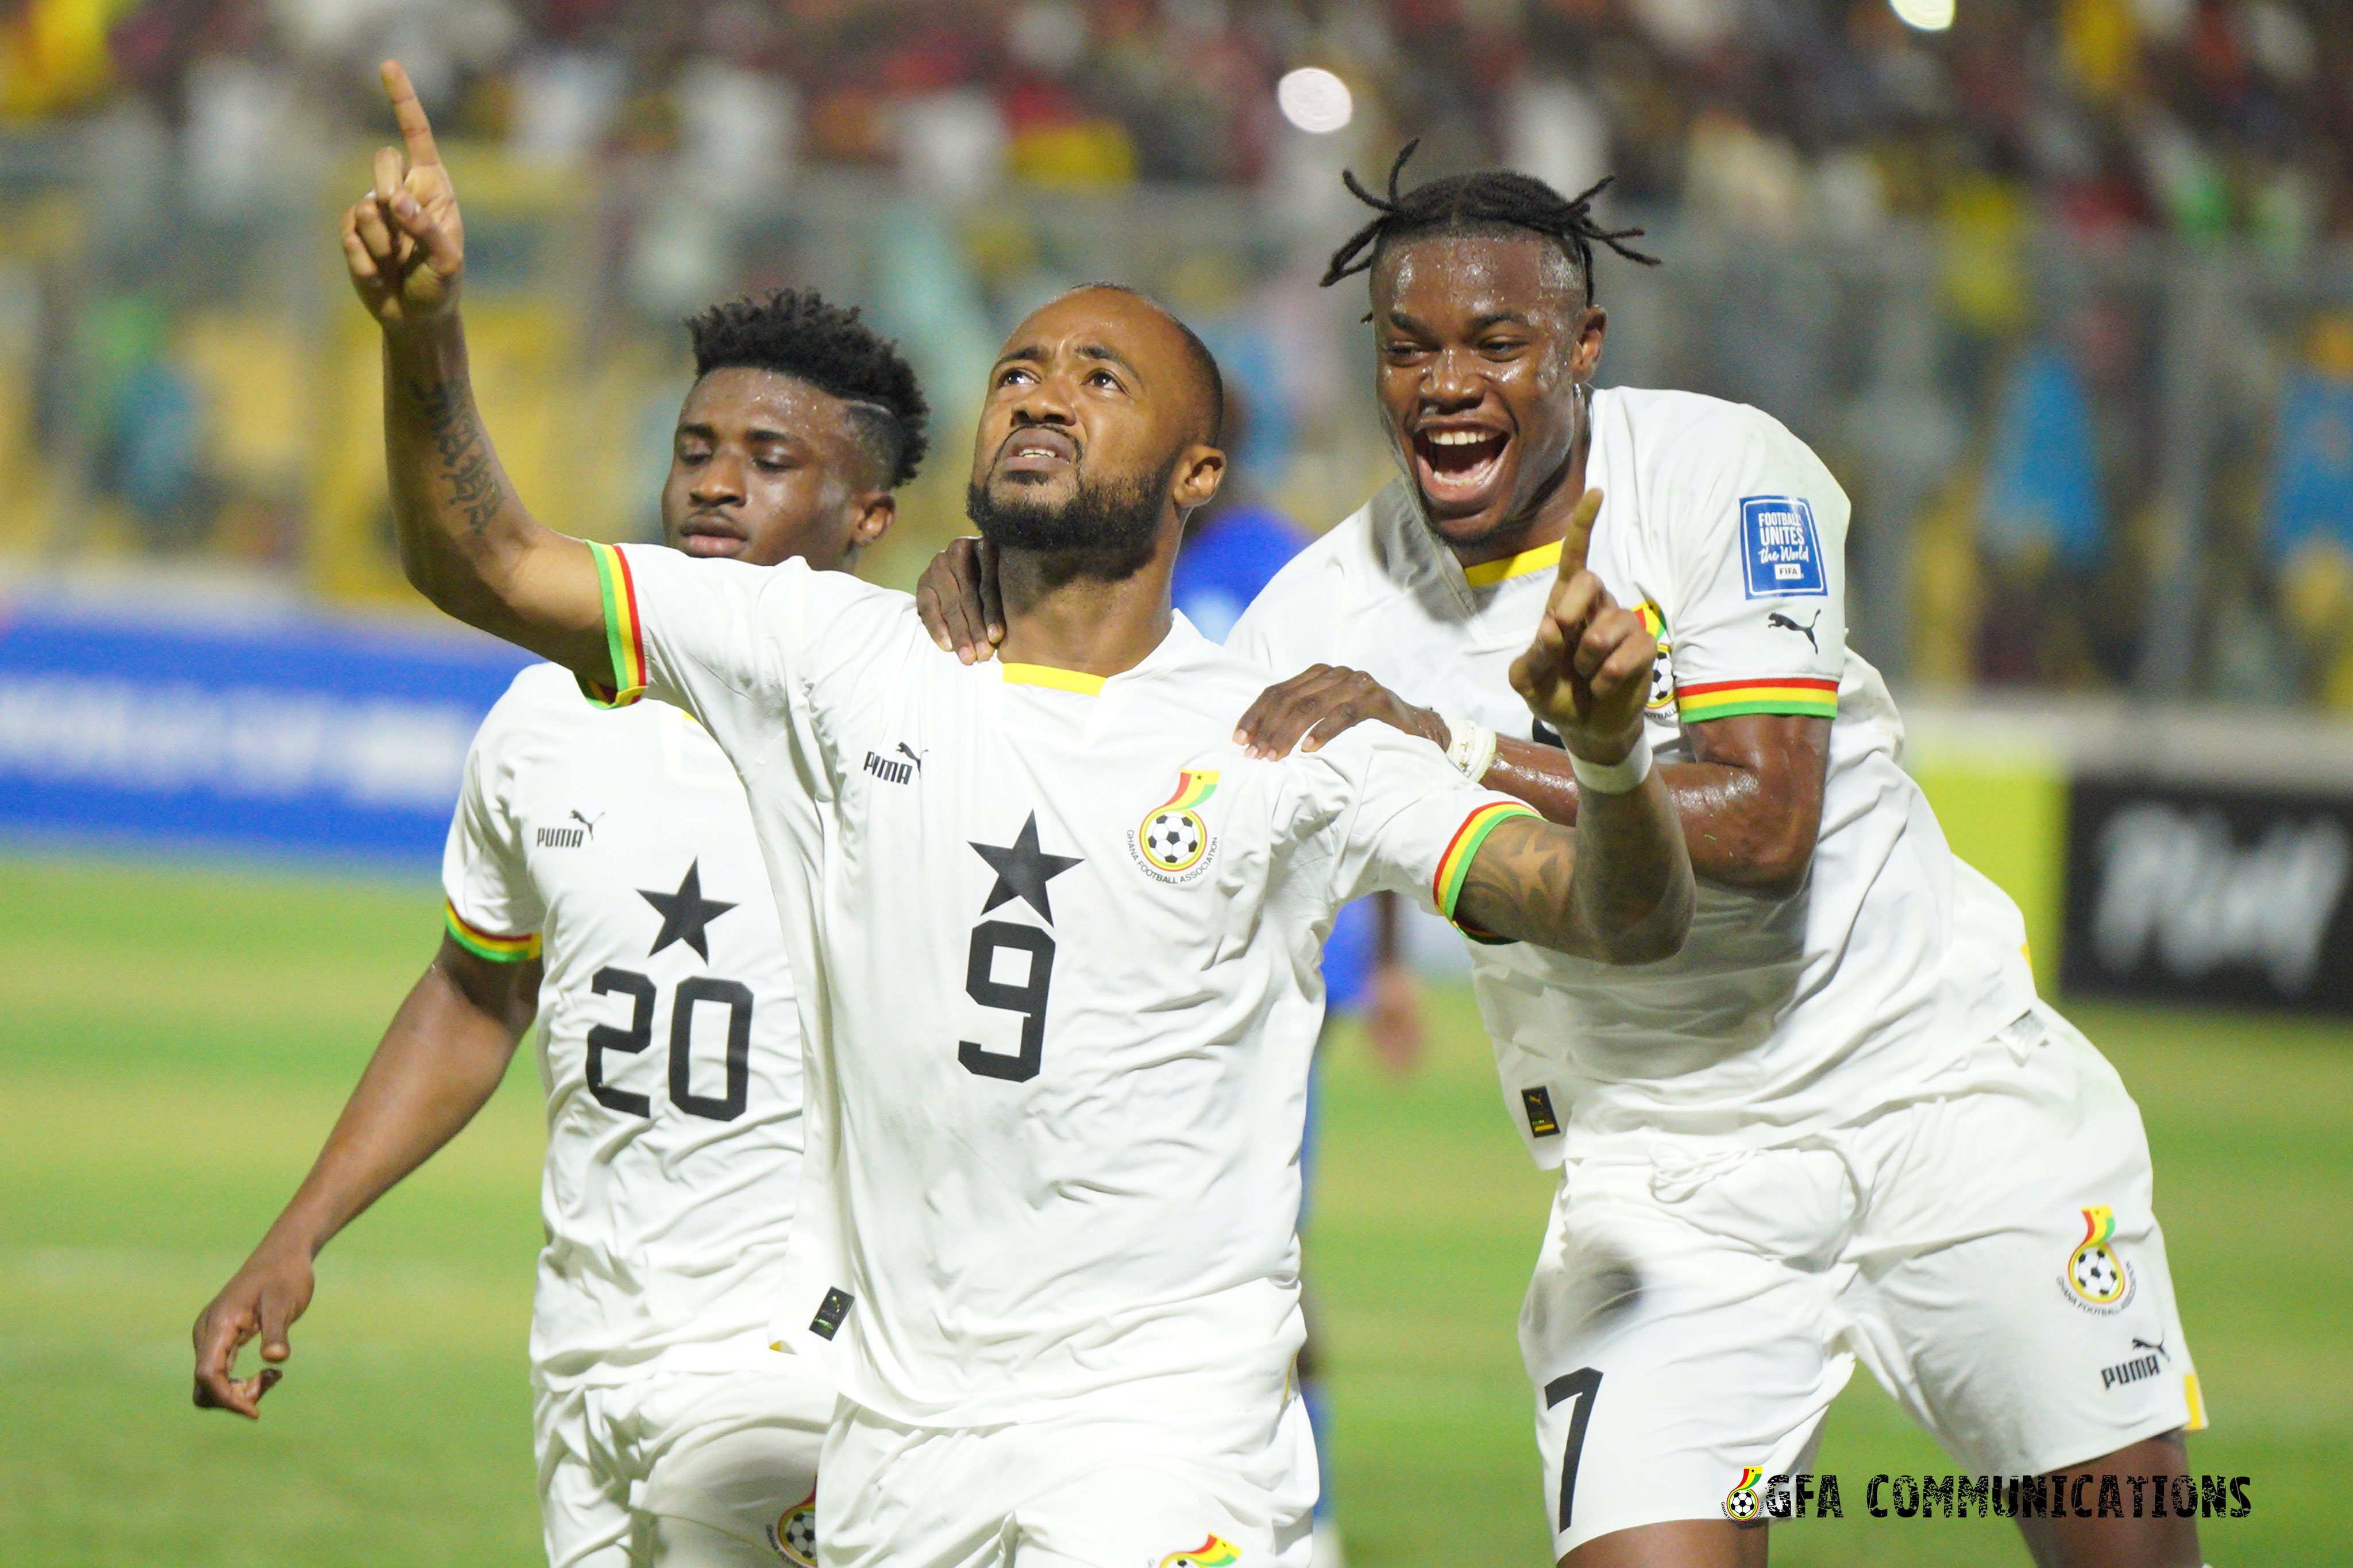 You fought a good fight and gave it your all - President Simeon-Okraku tells Black Stars